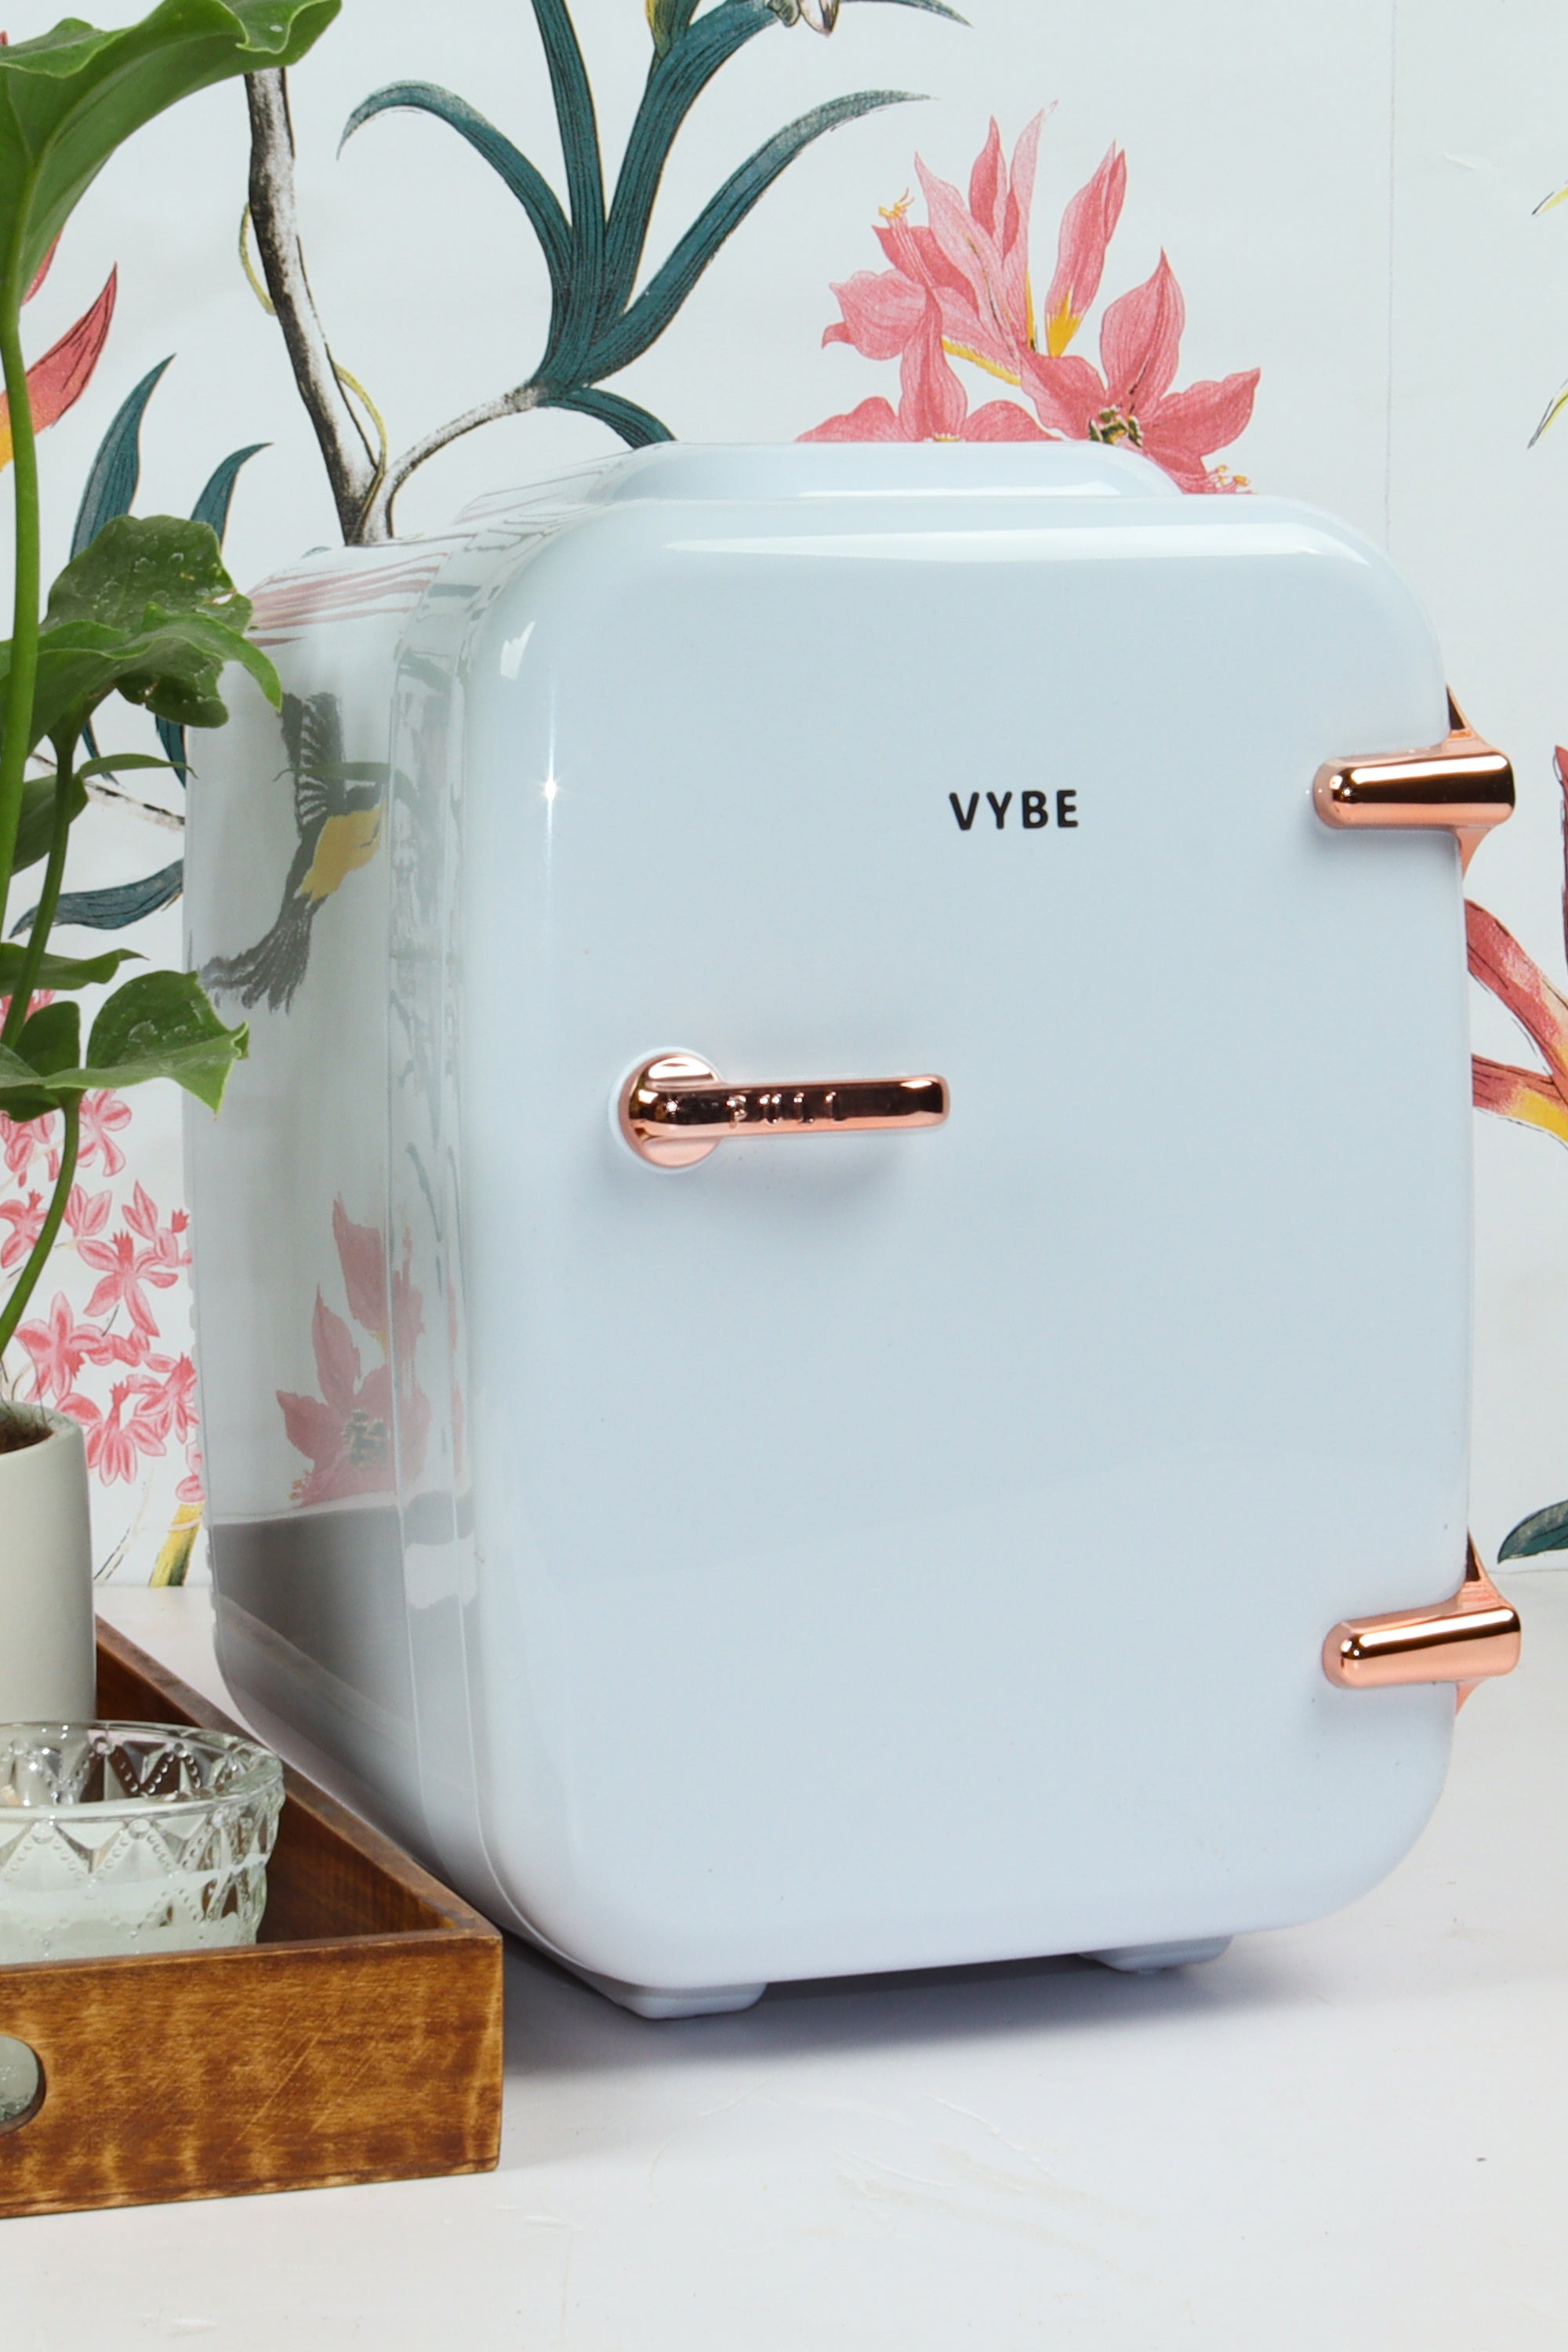 Keep your makeup cool and long-lasting with the Vybe mini beauty fridge